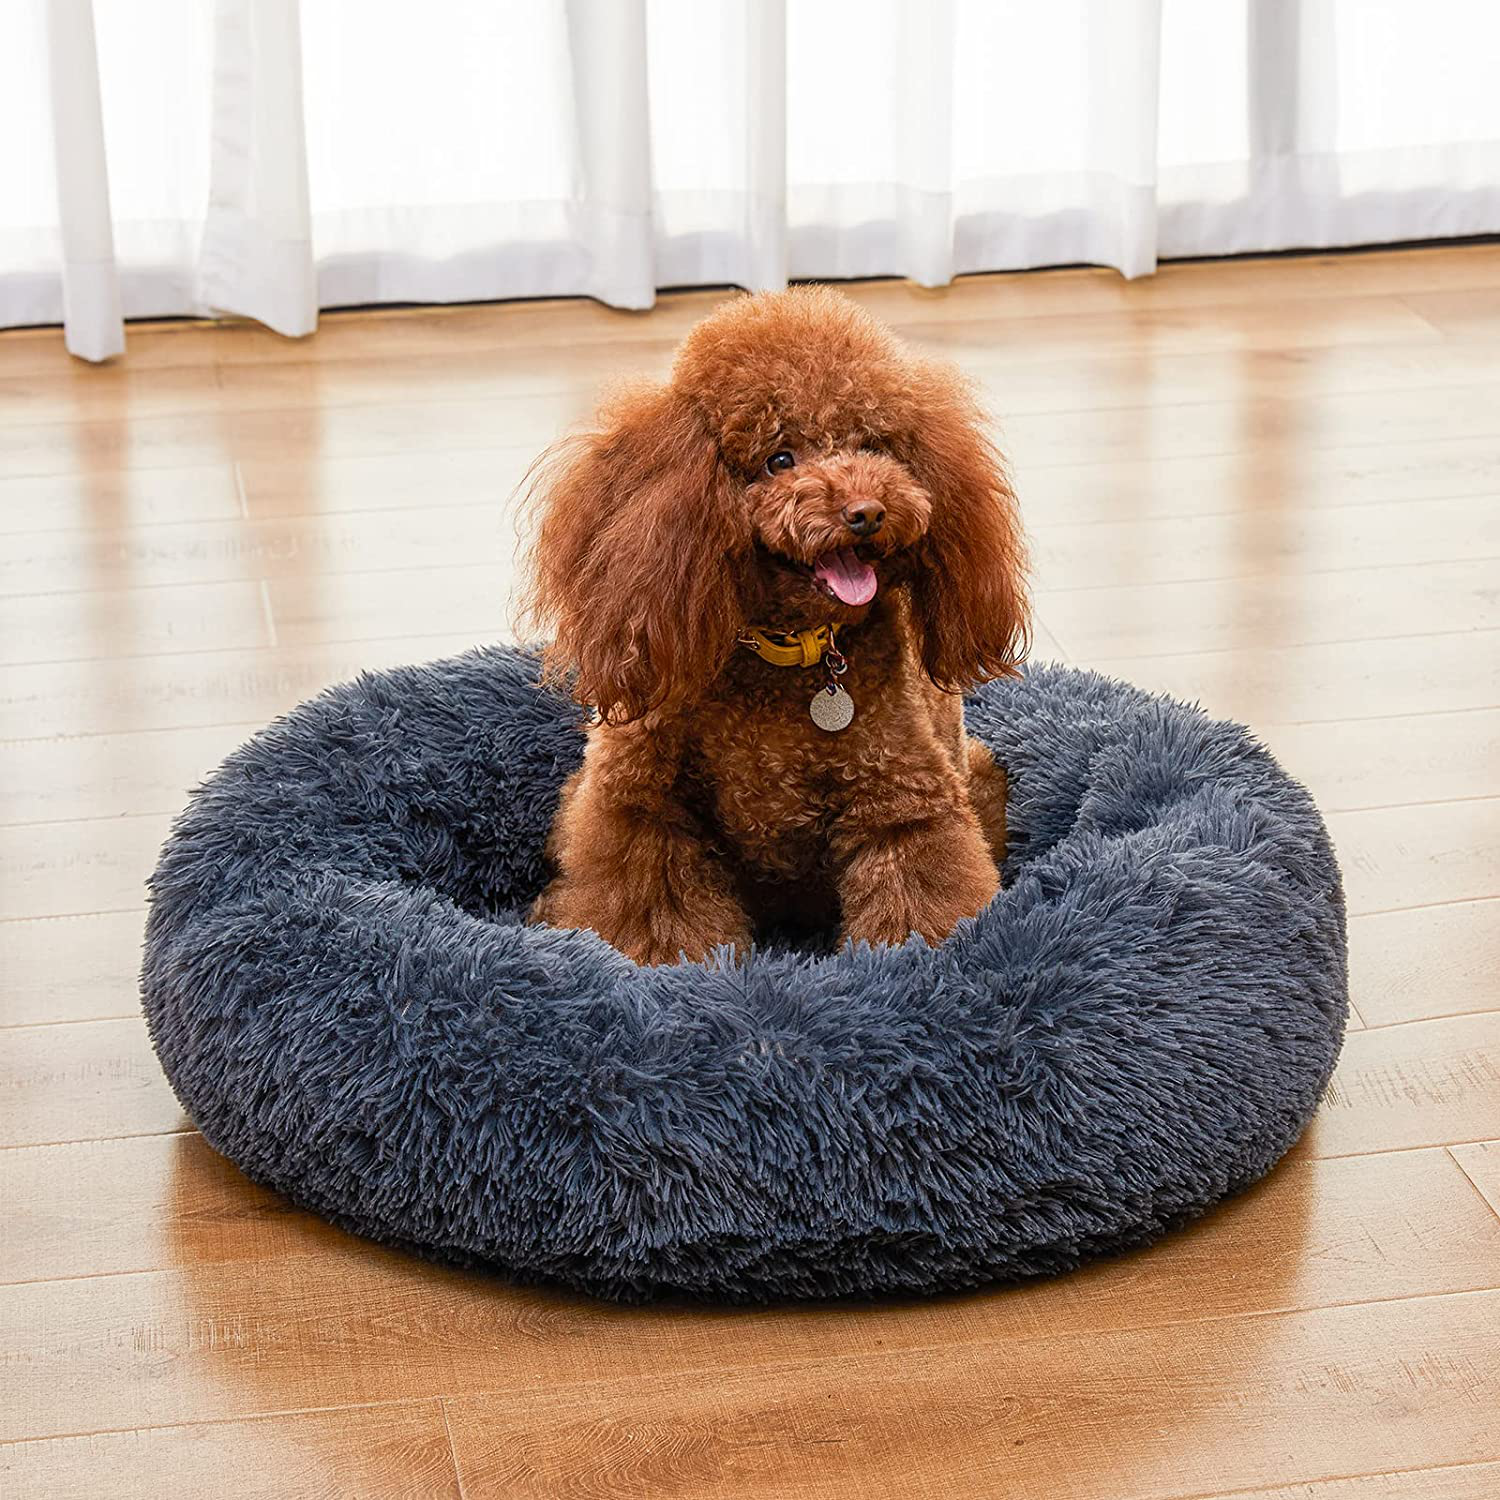 BEAUTYHB Calming Dog Bed, anti Anxiety round Fluffy Dog and Cat Sofa, Original Calming Dog Bed for Small Medium Large Pets, Warm and Washable Dog and Cat Bed